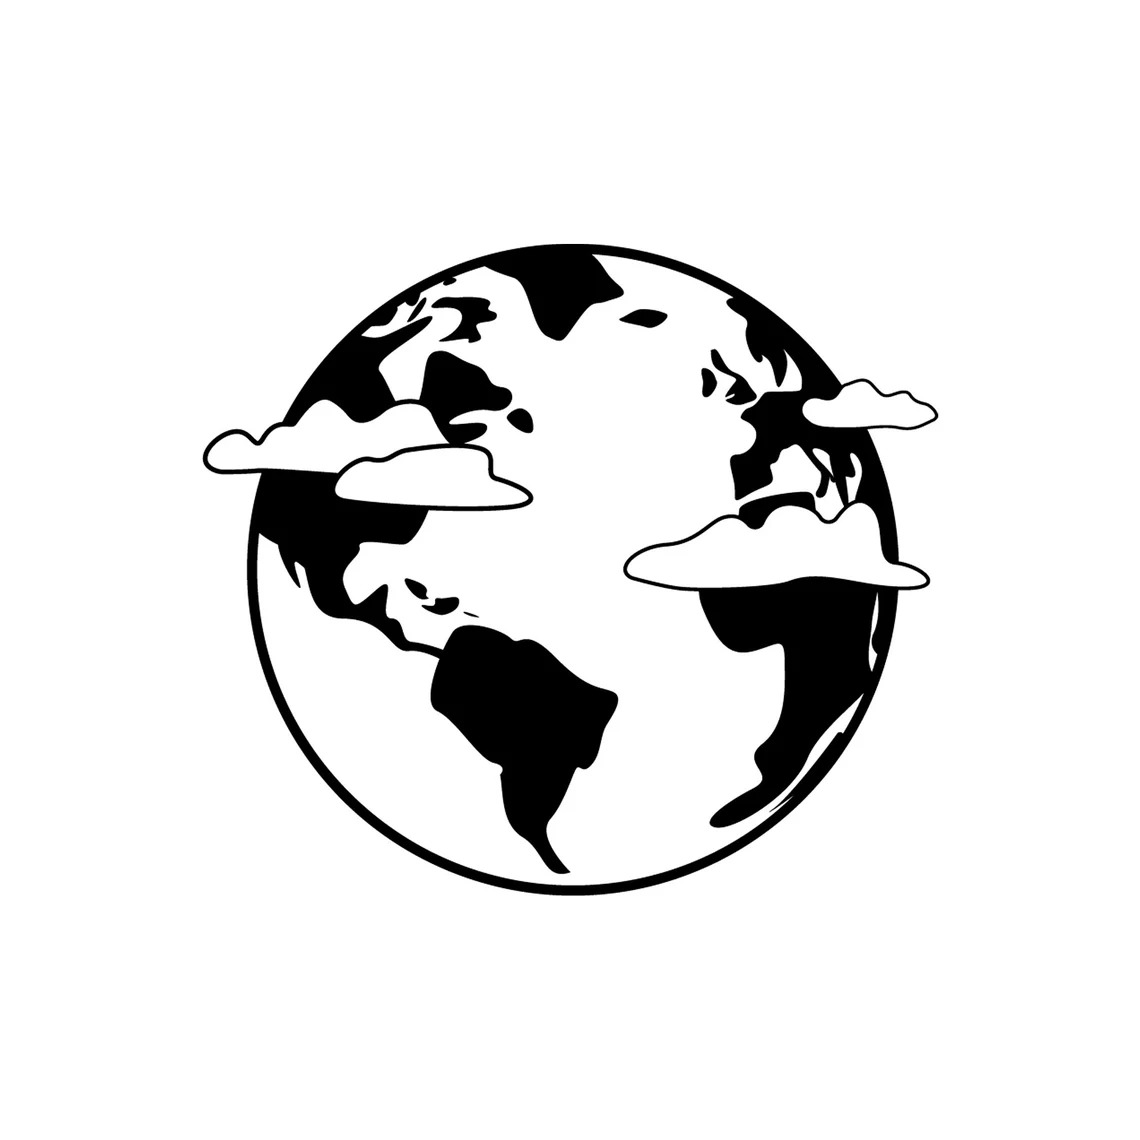 Planet Earth is depicted in black and white.